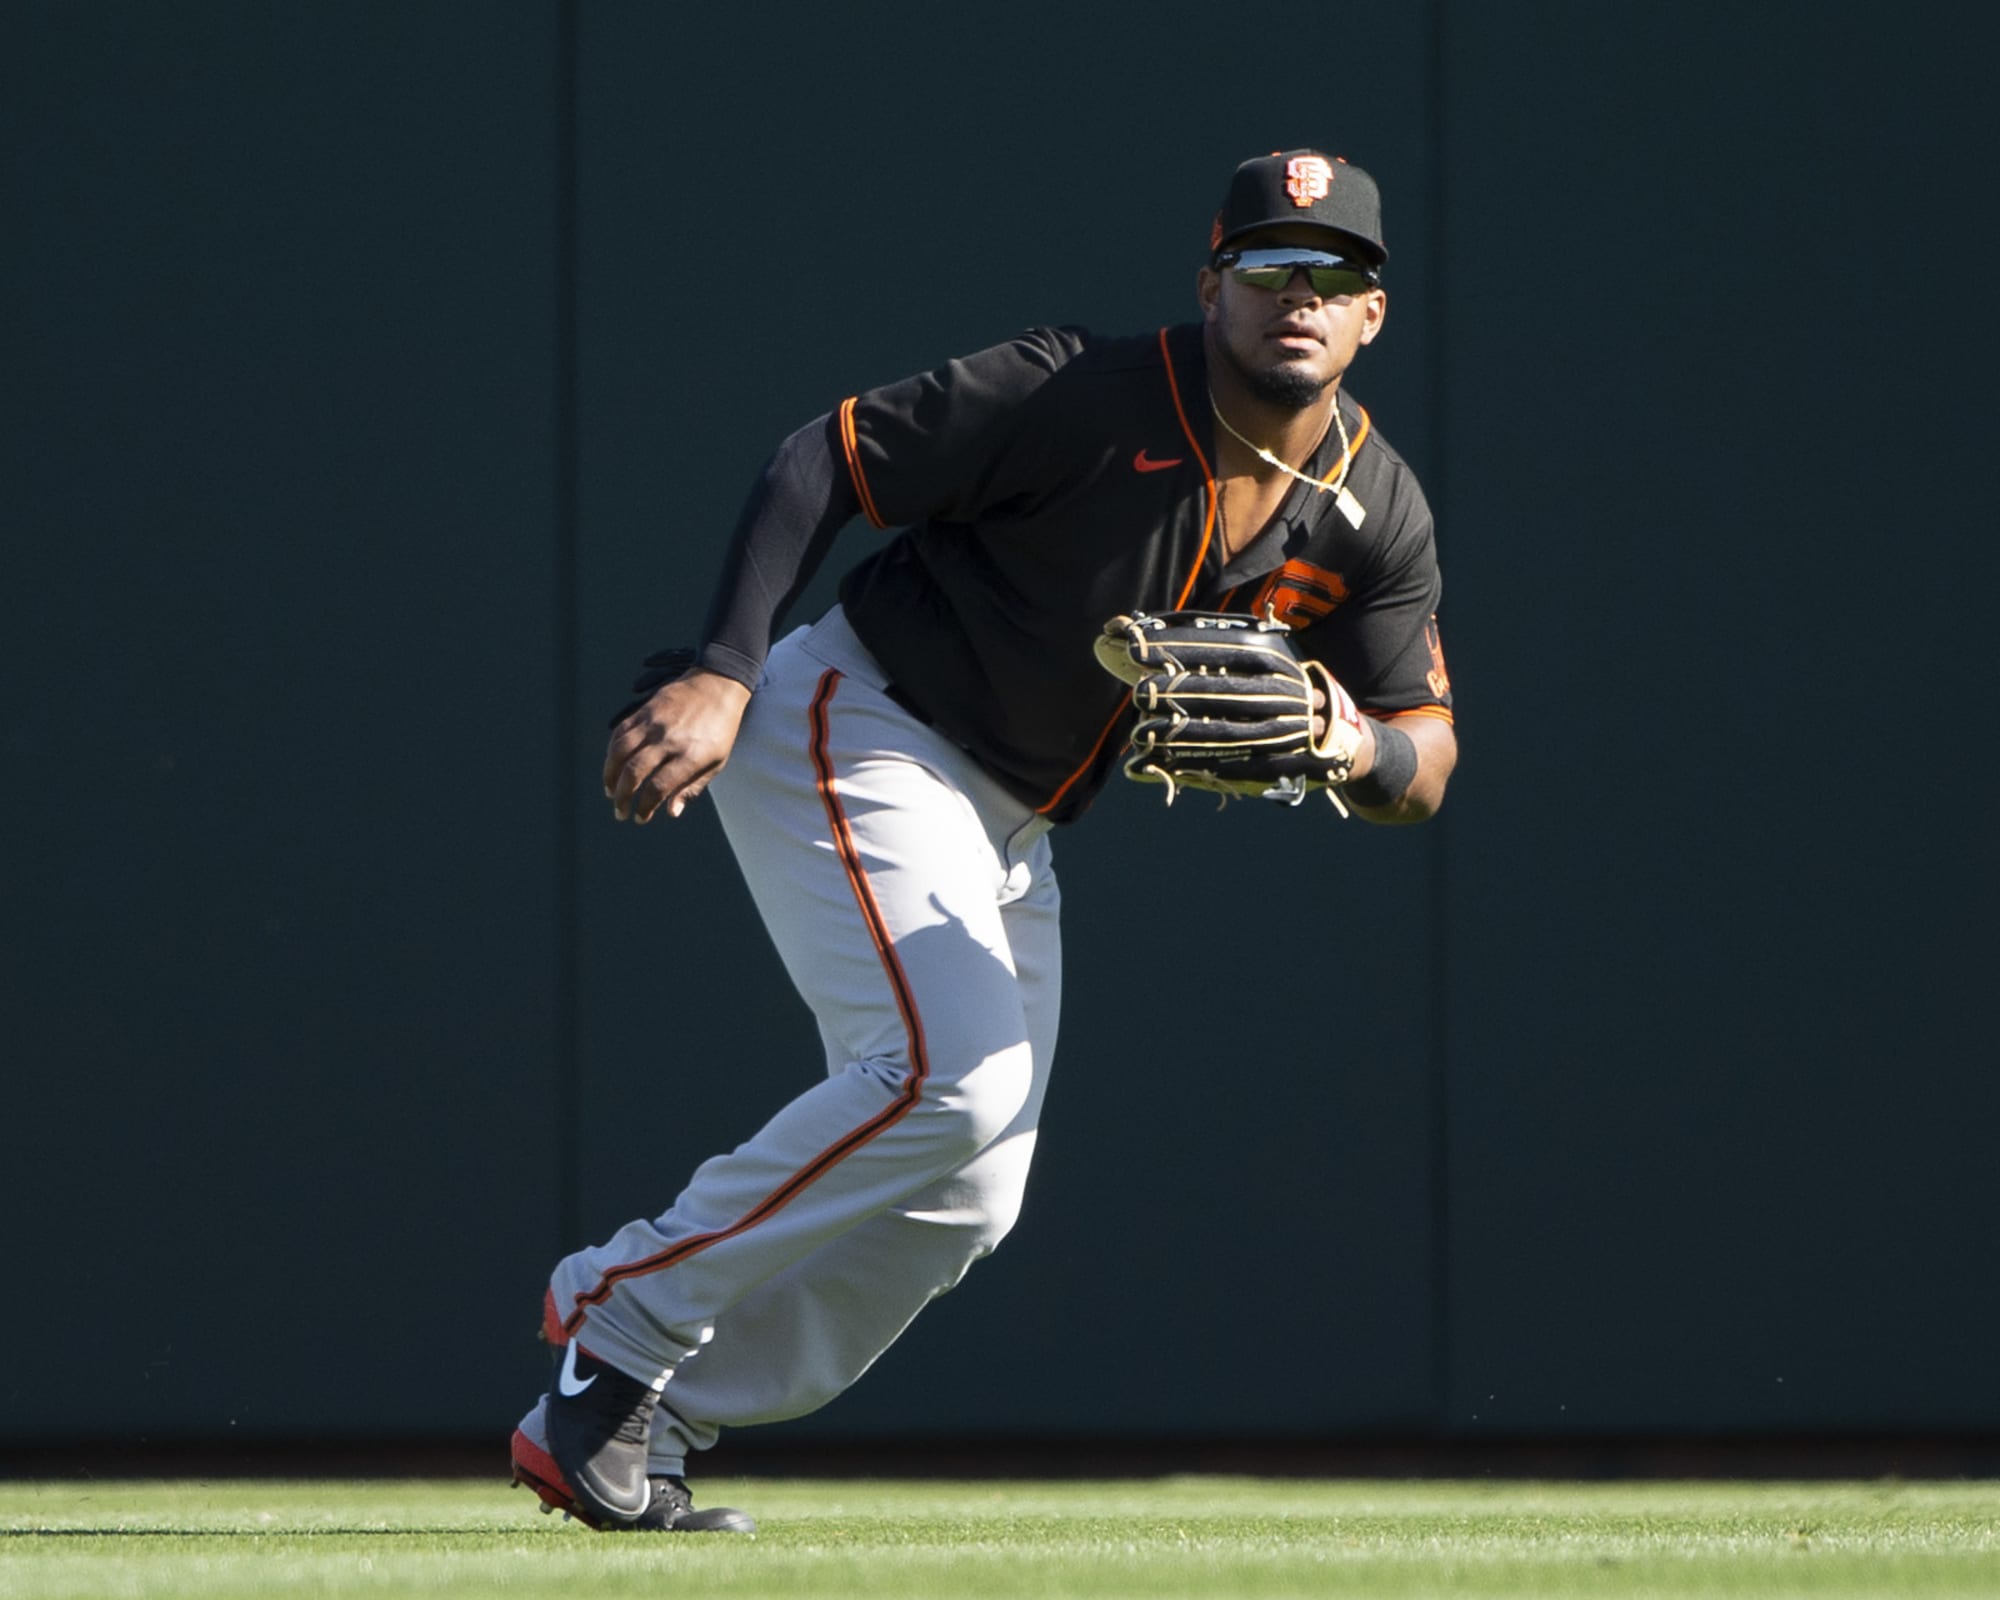 First Bart, now Ramos: SF Giants' future is arriving this season